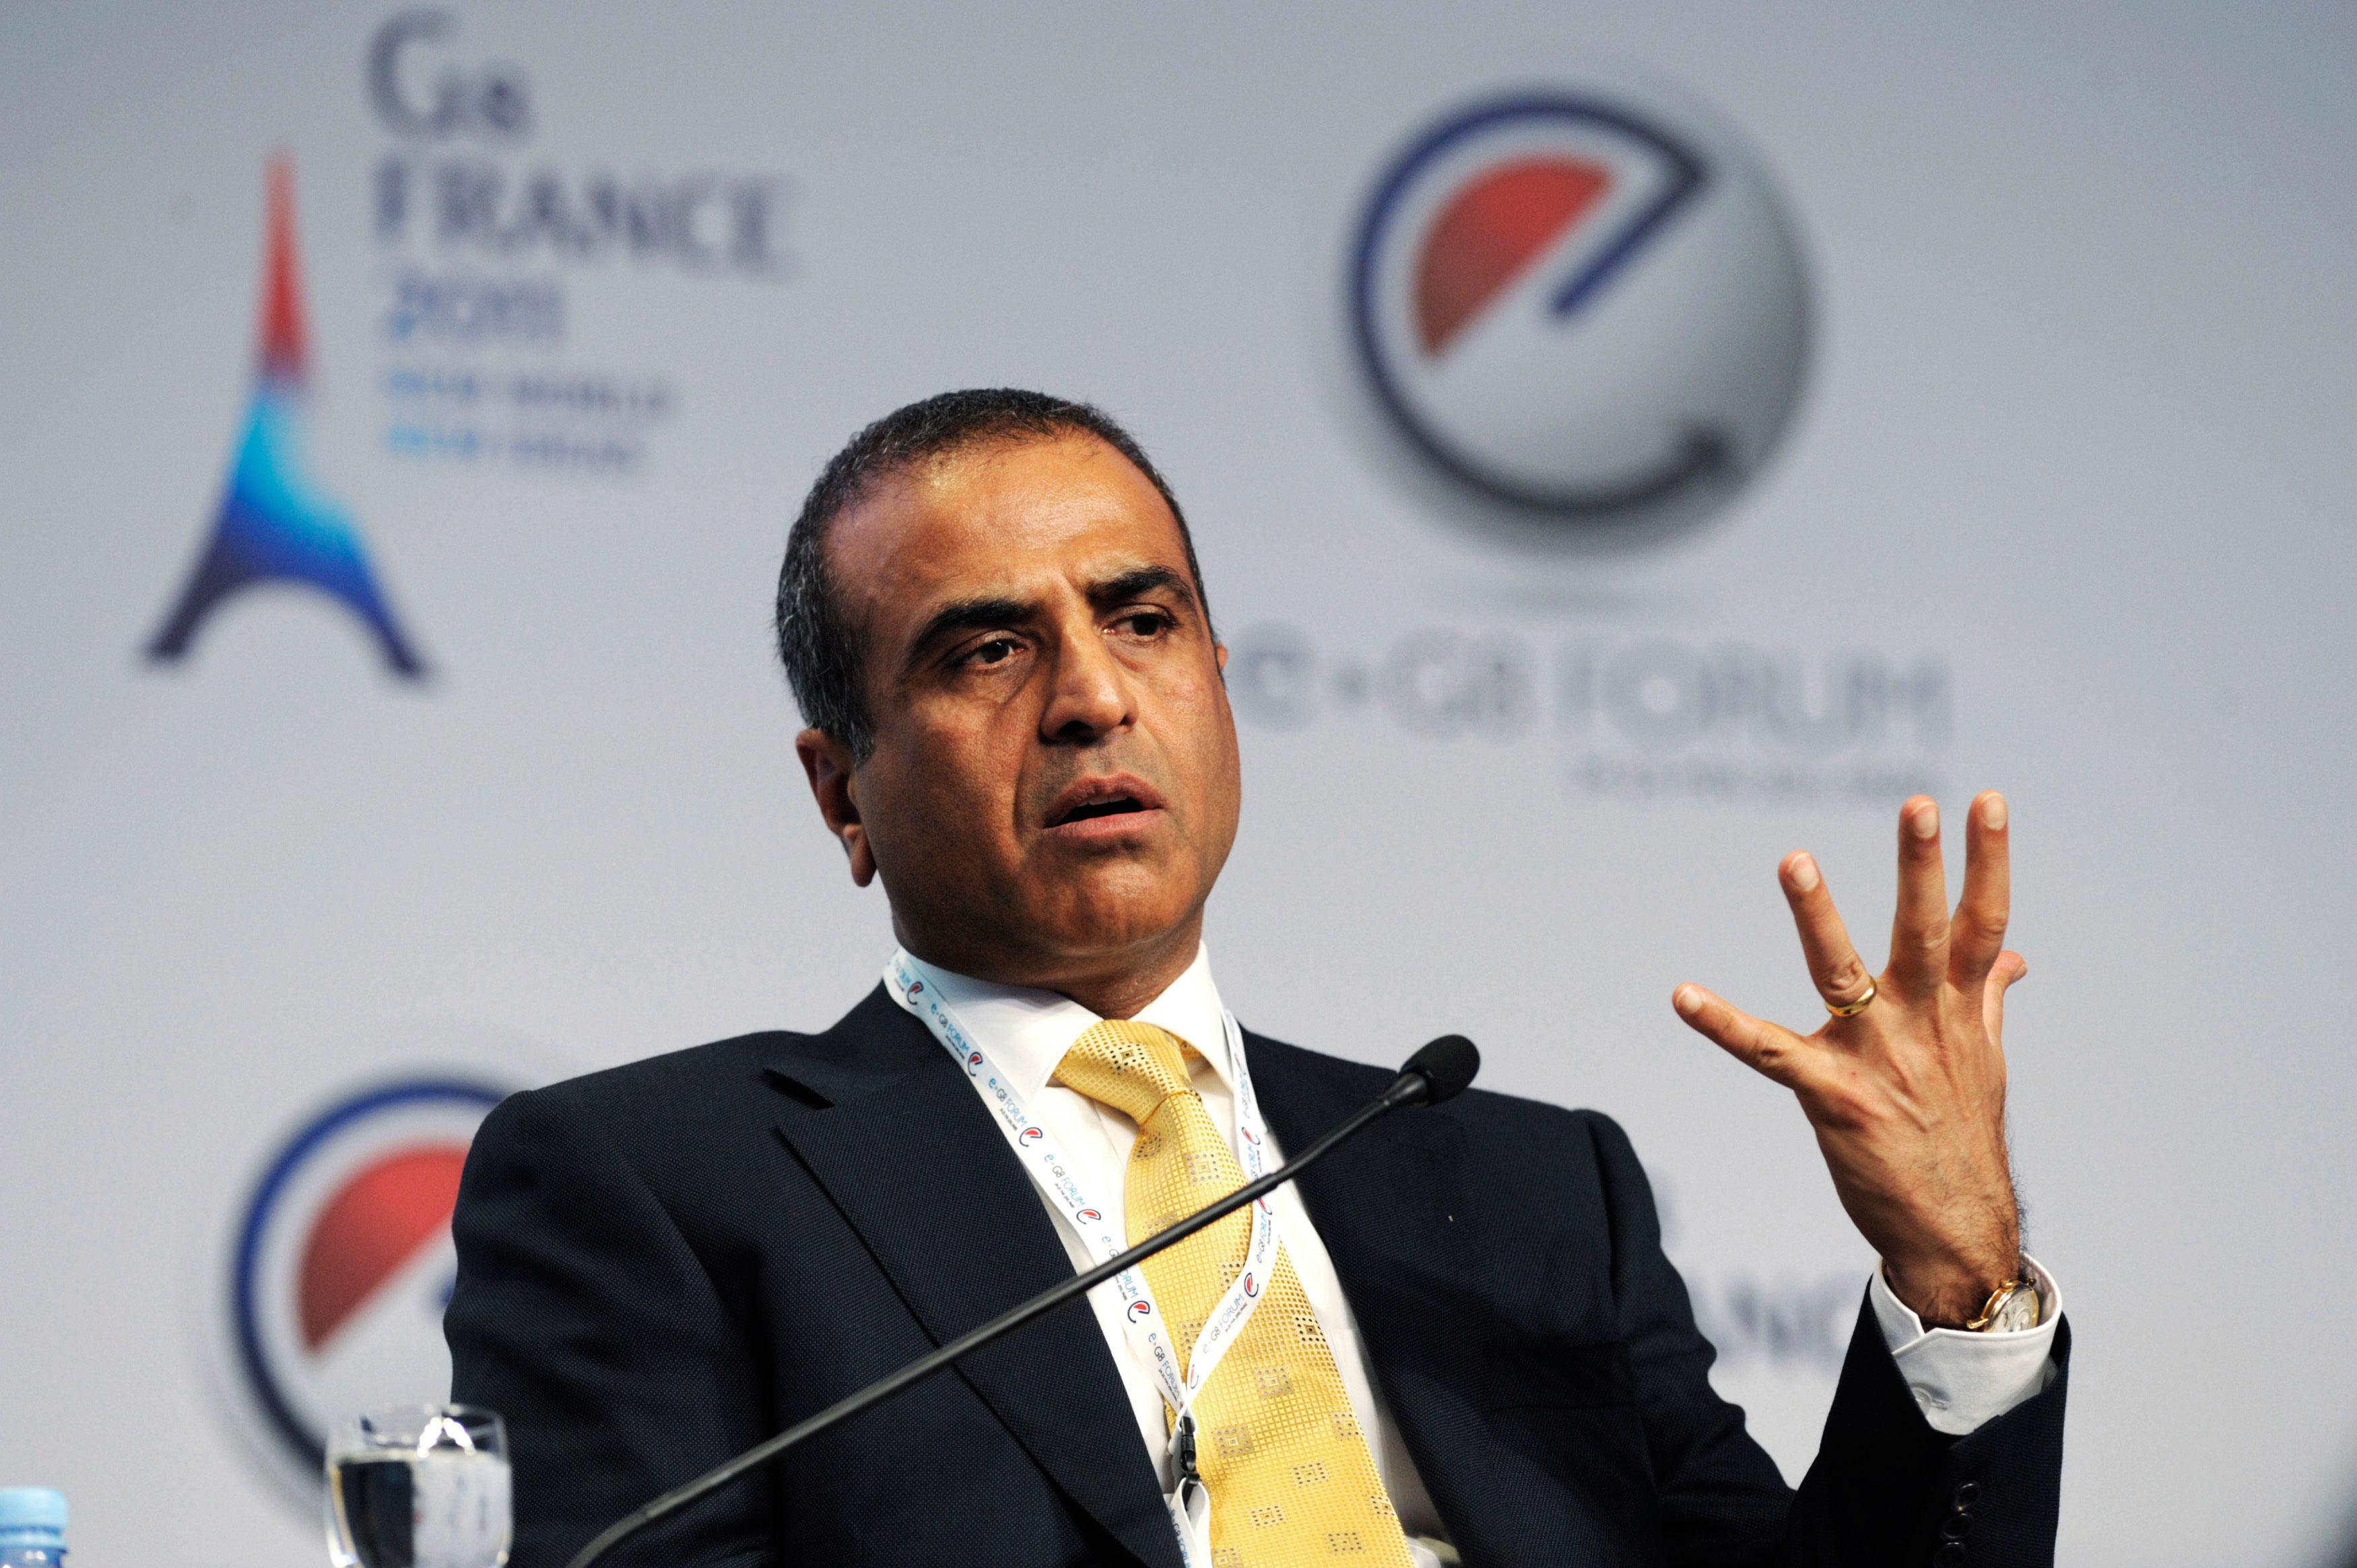 Bharti Airtel scraps sale of African tower assets to Helios